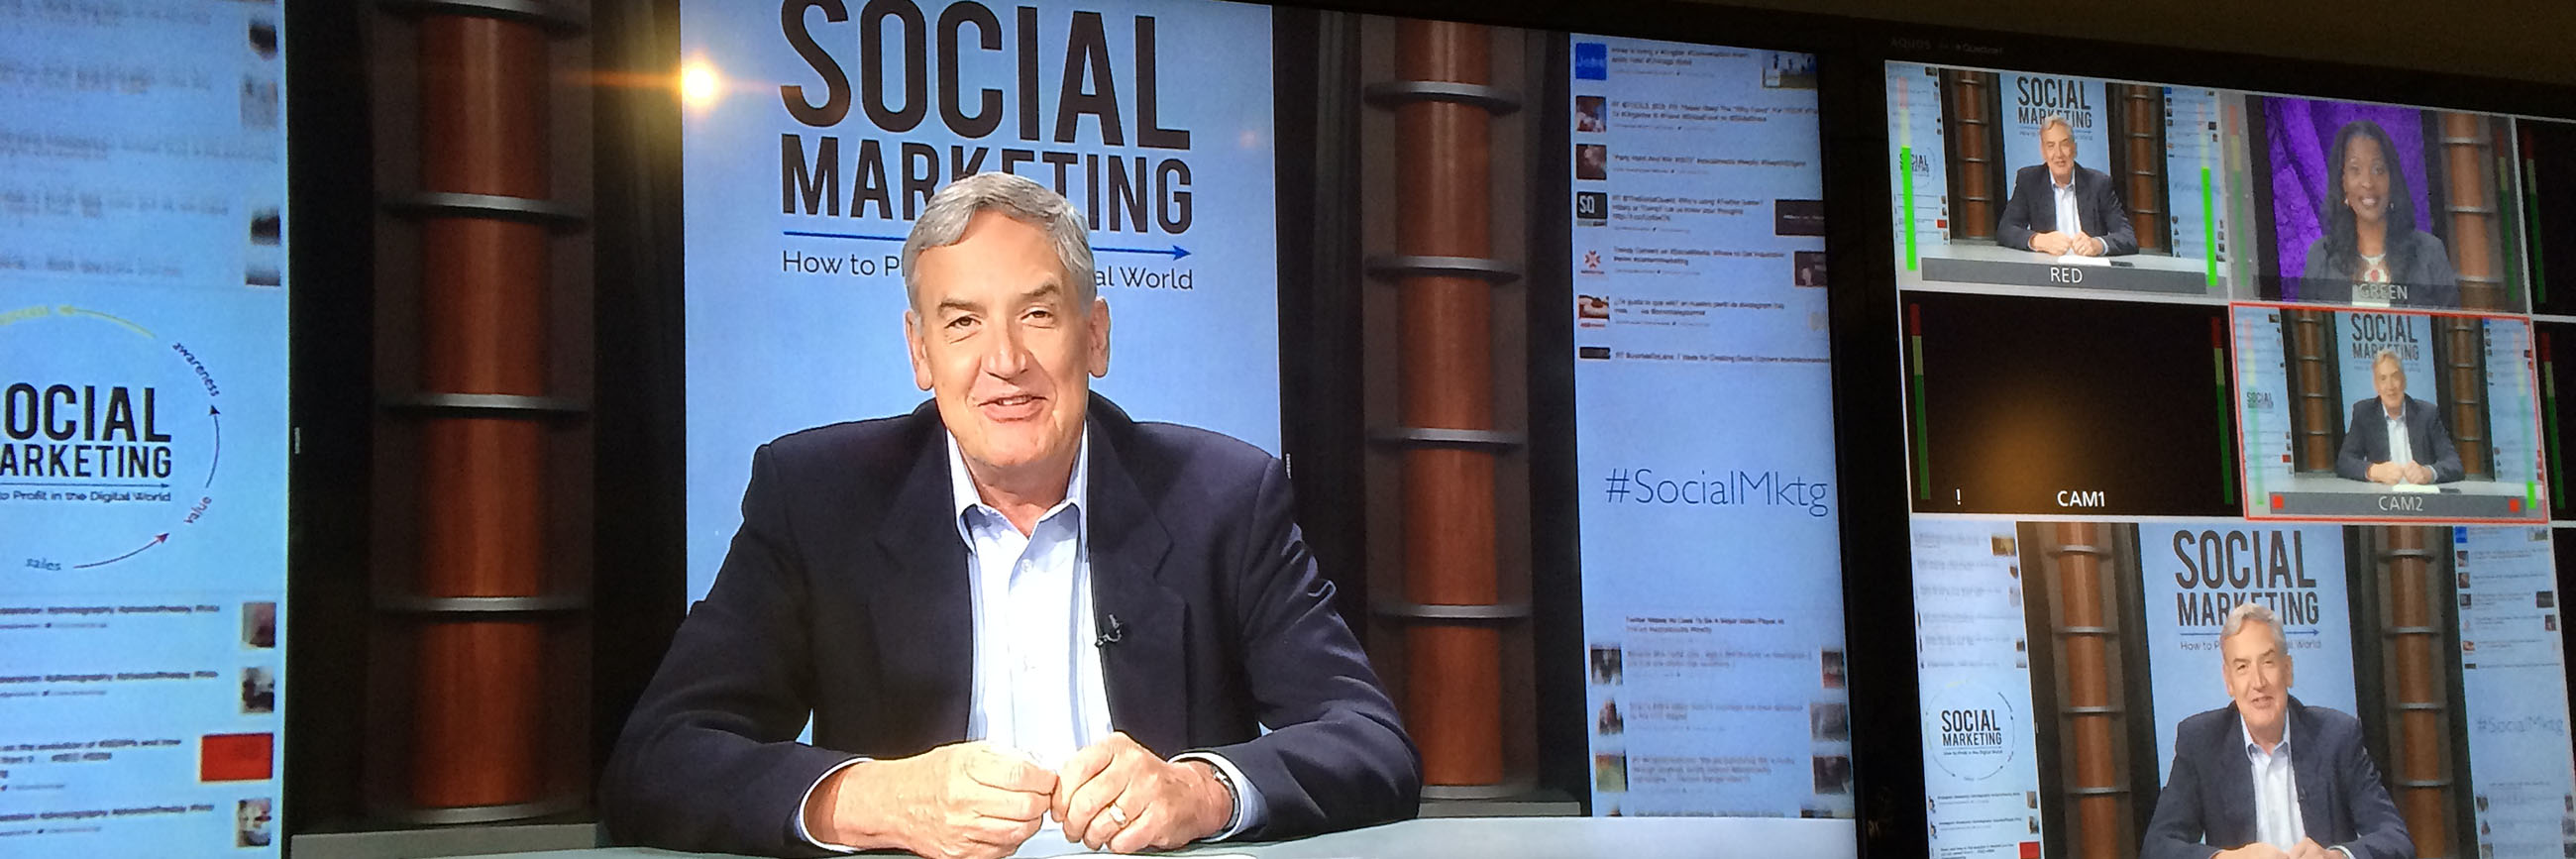 Presenter speaking at a desk with signs that say social marketing behind him